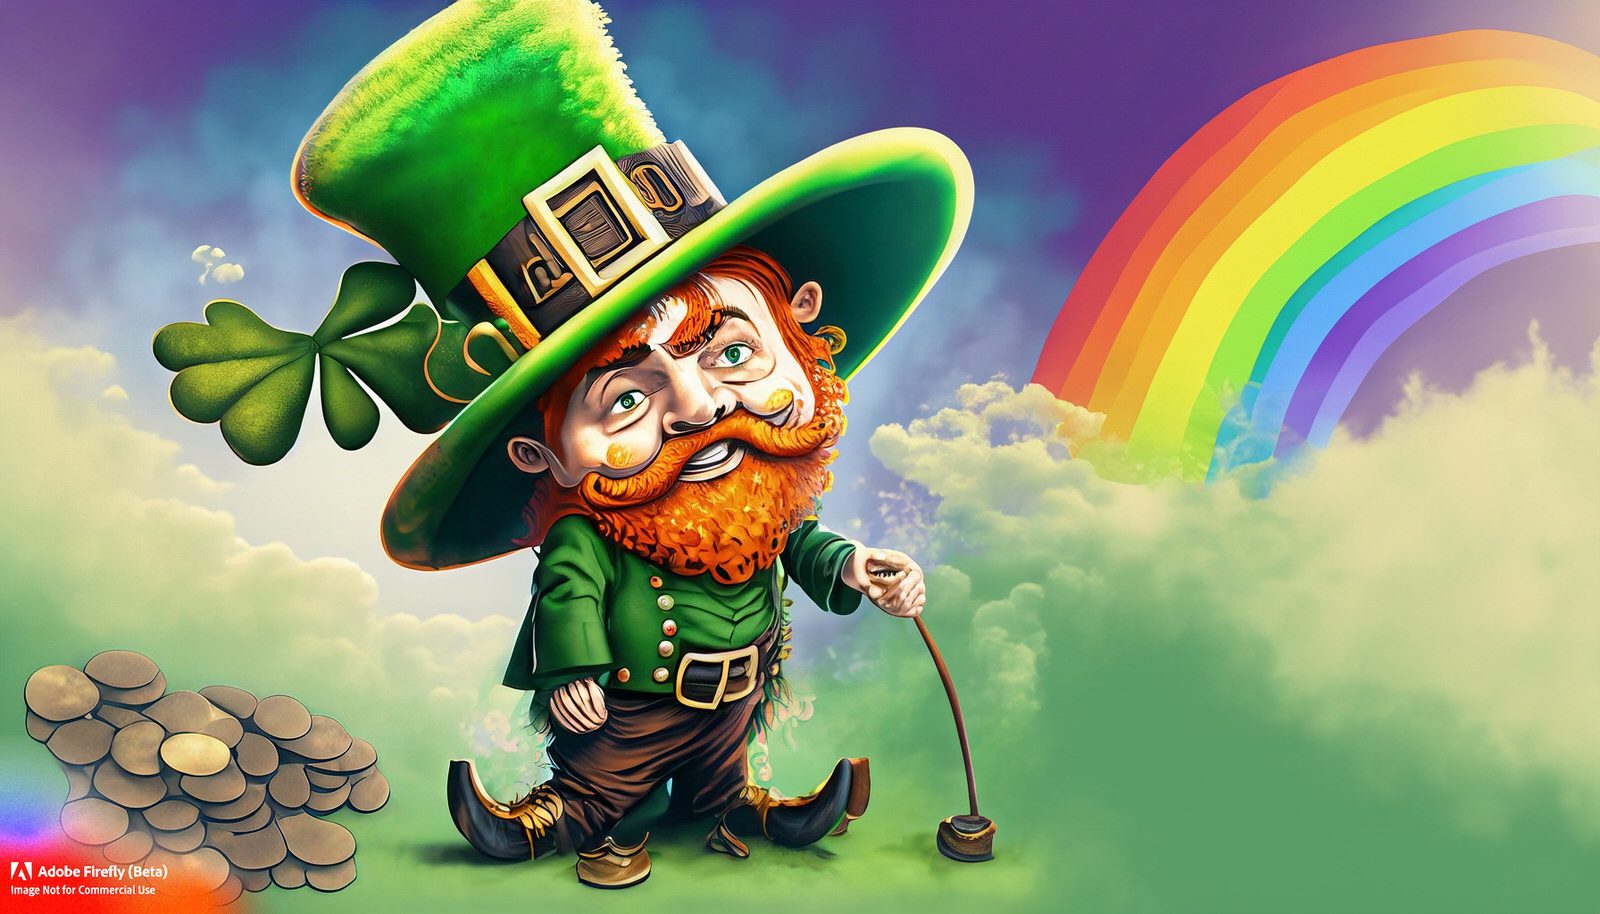 IF YOU ASK ADOBE FIREFLY TO GENERATE AN IMAGE OF A LEPRECHAUN THIS IS WHAT YOU GET 002